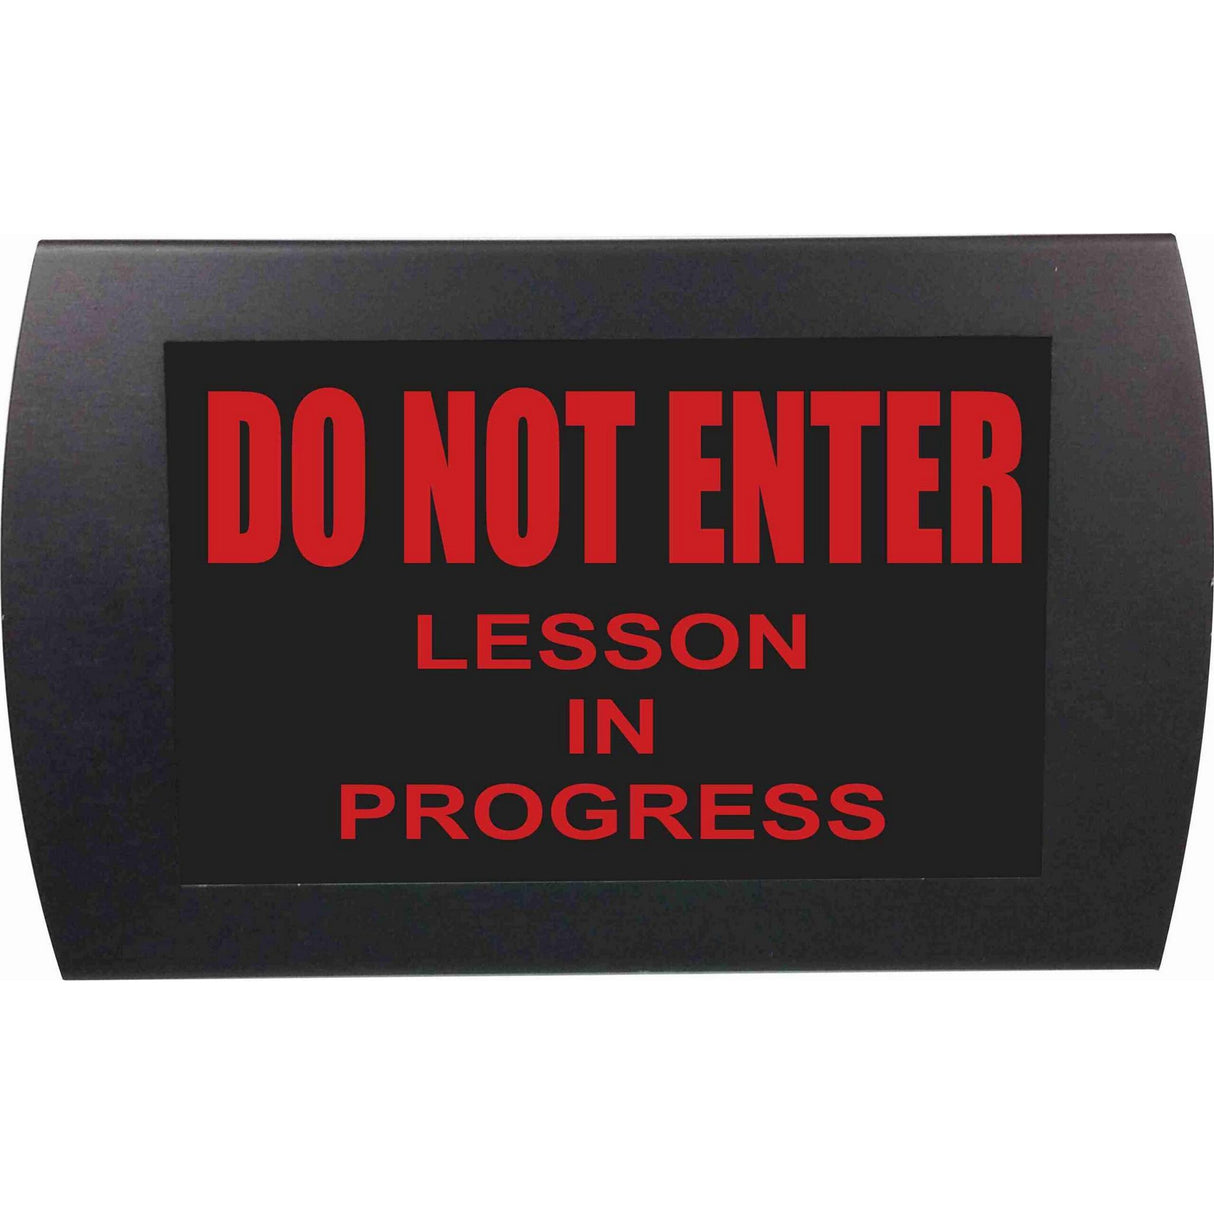 American Recorder OAS-2019M-RD "DO NOT ENTER - LESSON" LED Lighted Sign, Red